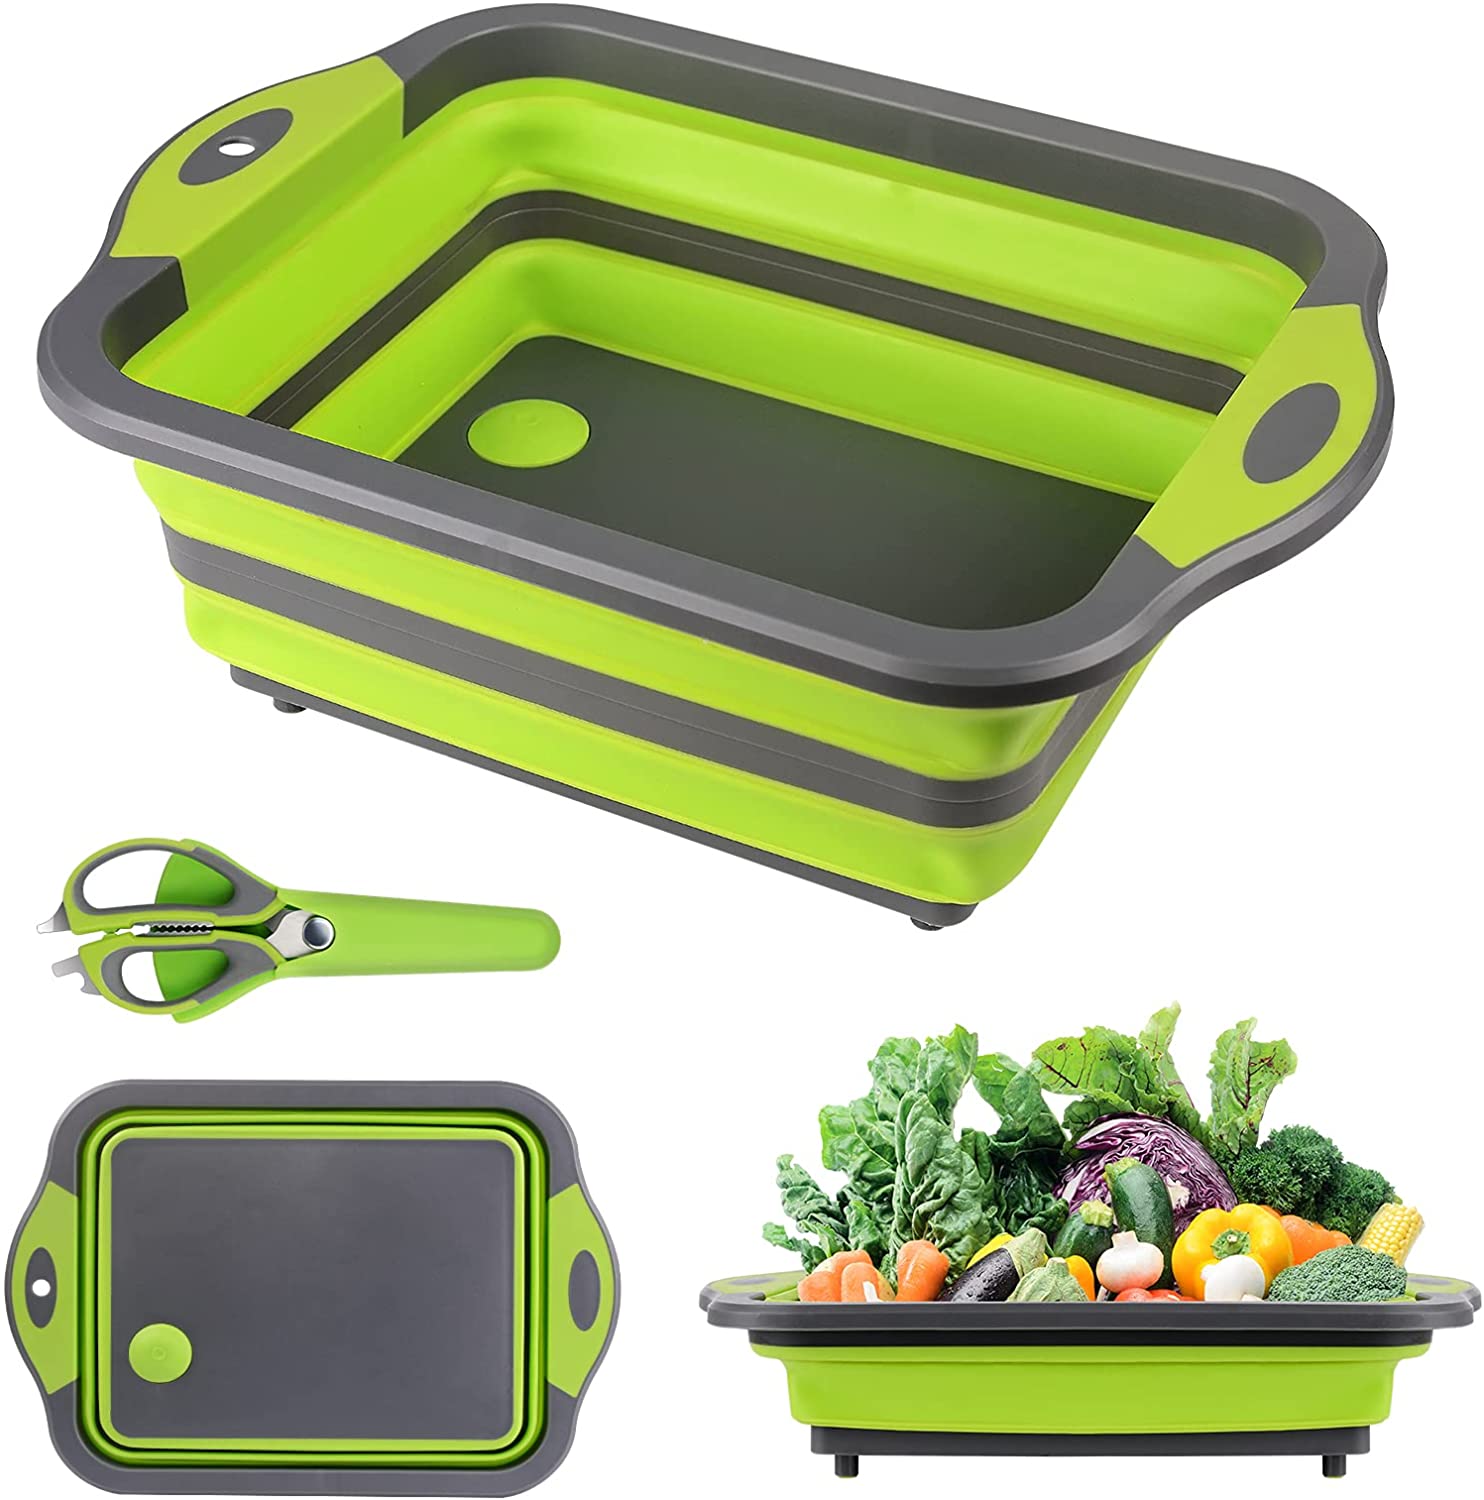 Portable Camping Kitchen Sink